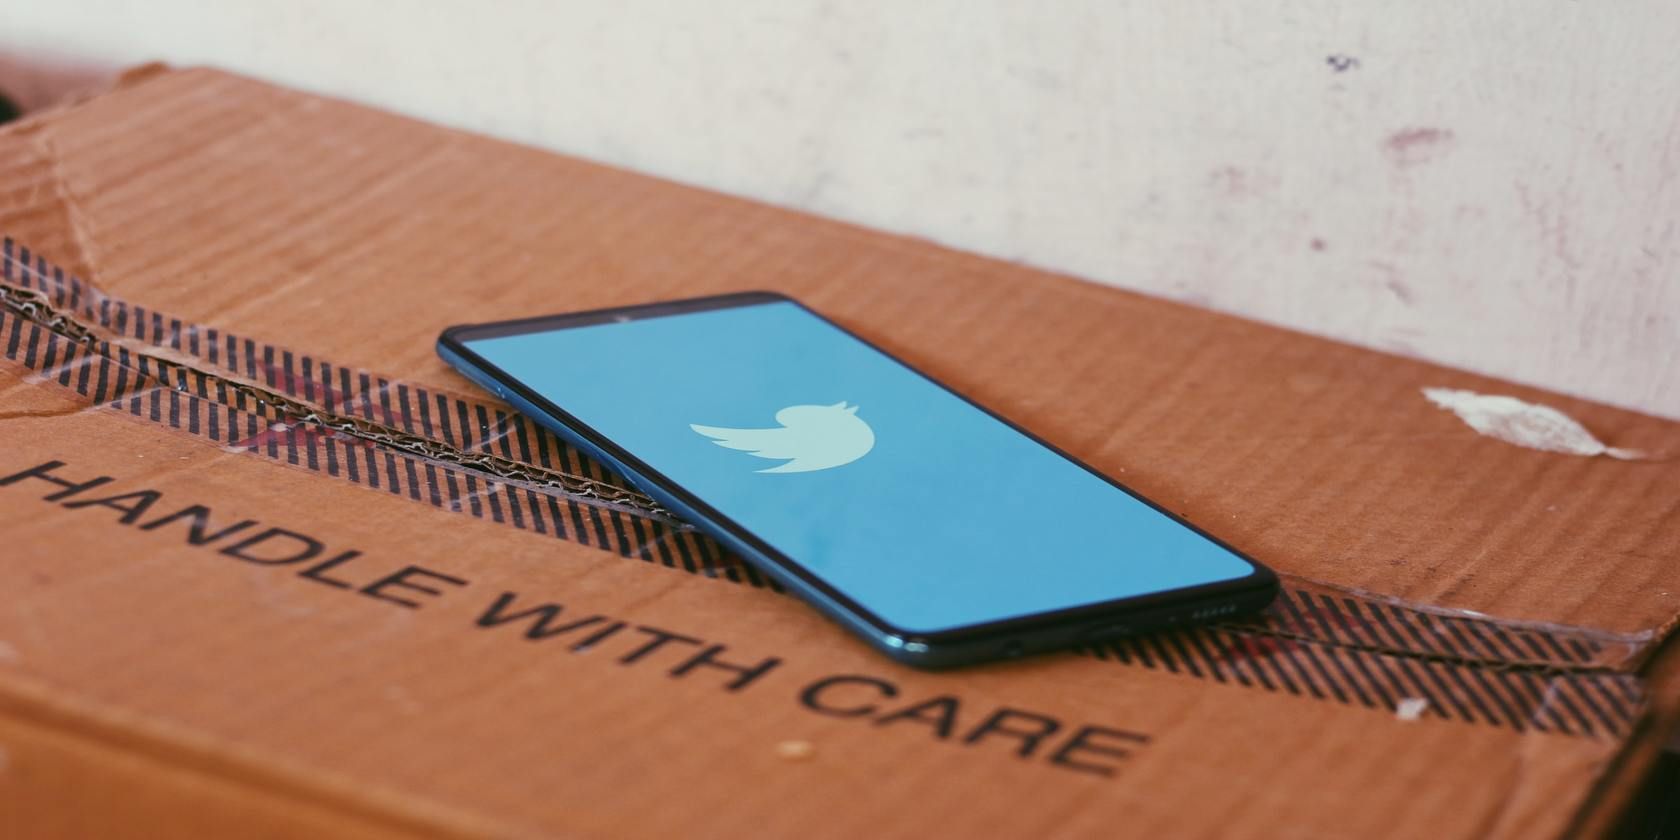 A mobile phone showing the Twitter splash screen, a bird logo on a blue background